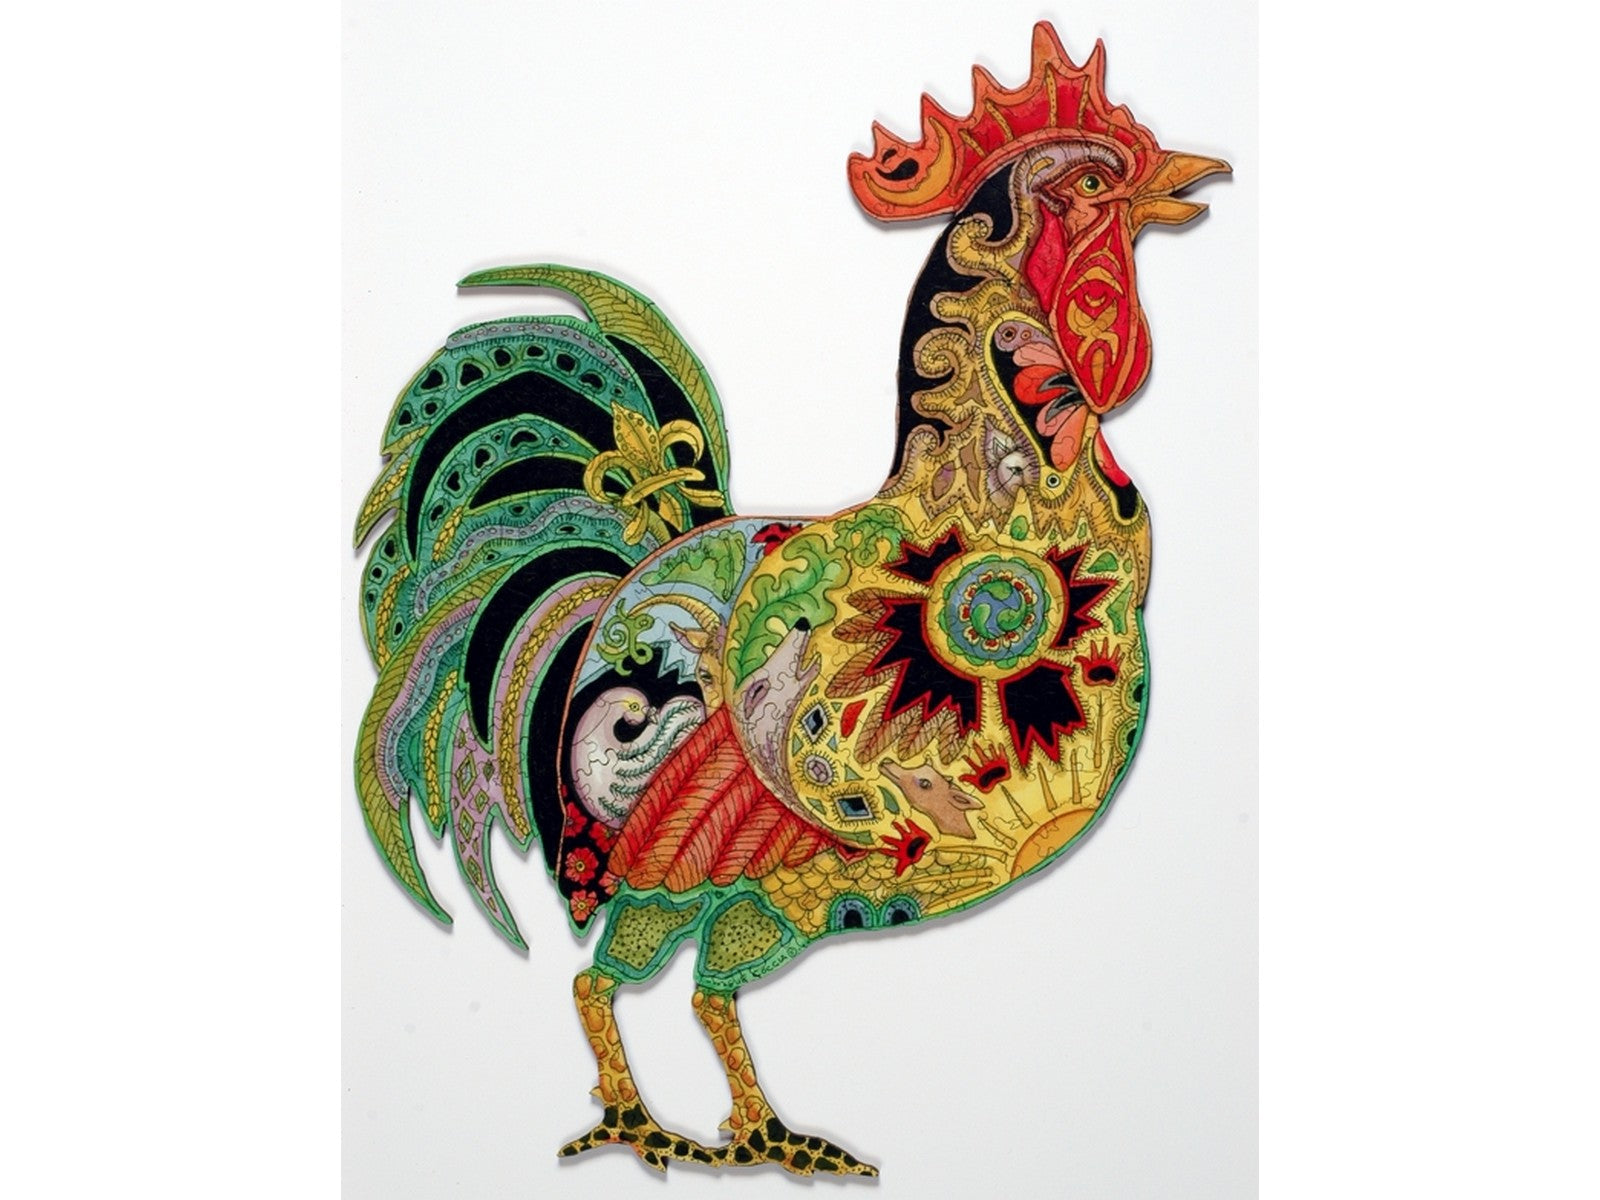 The front of the puzzle, Rooster, which shows various plants and animals in the shape of a rooster.